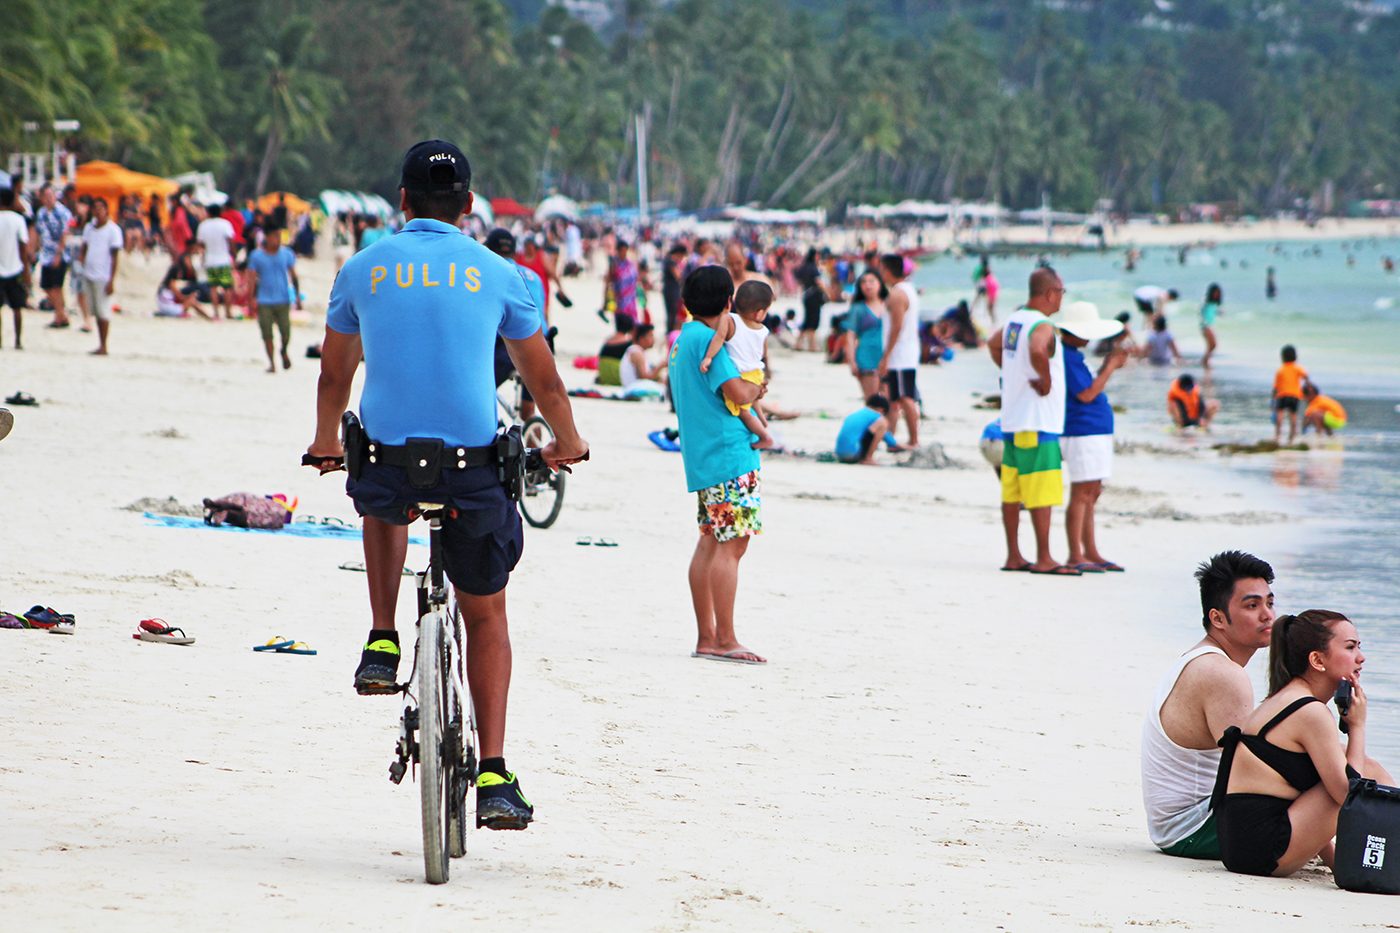 DILG’s Boracay plan: 6-month state of calamity, 2-month business shutdown